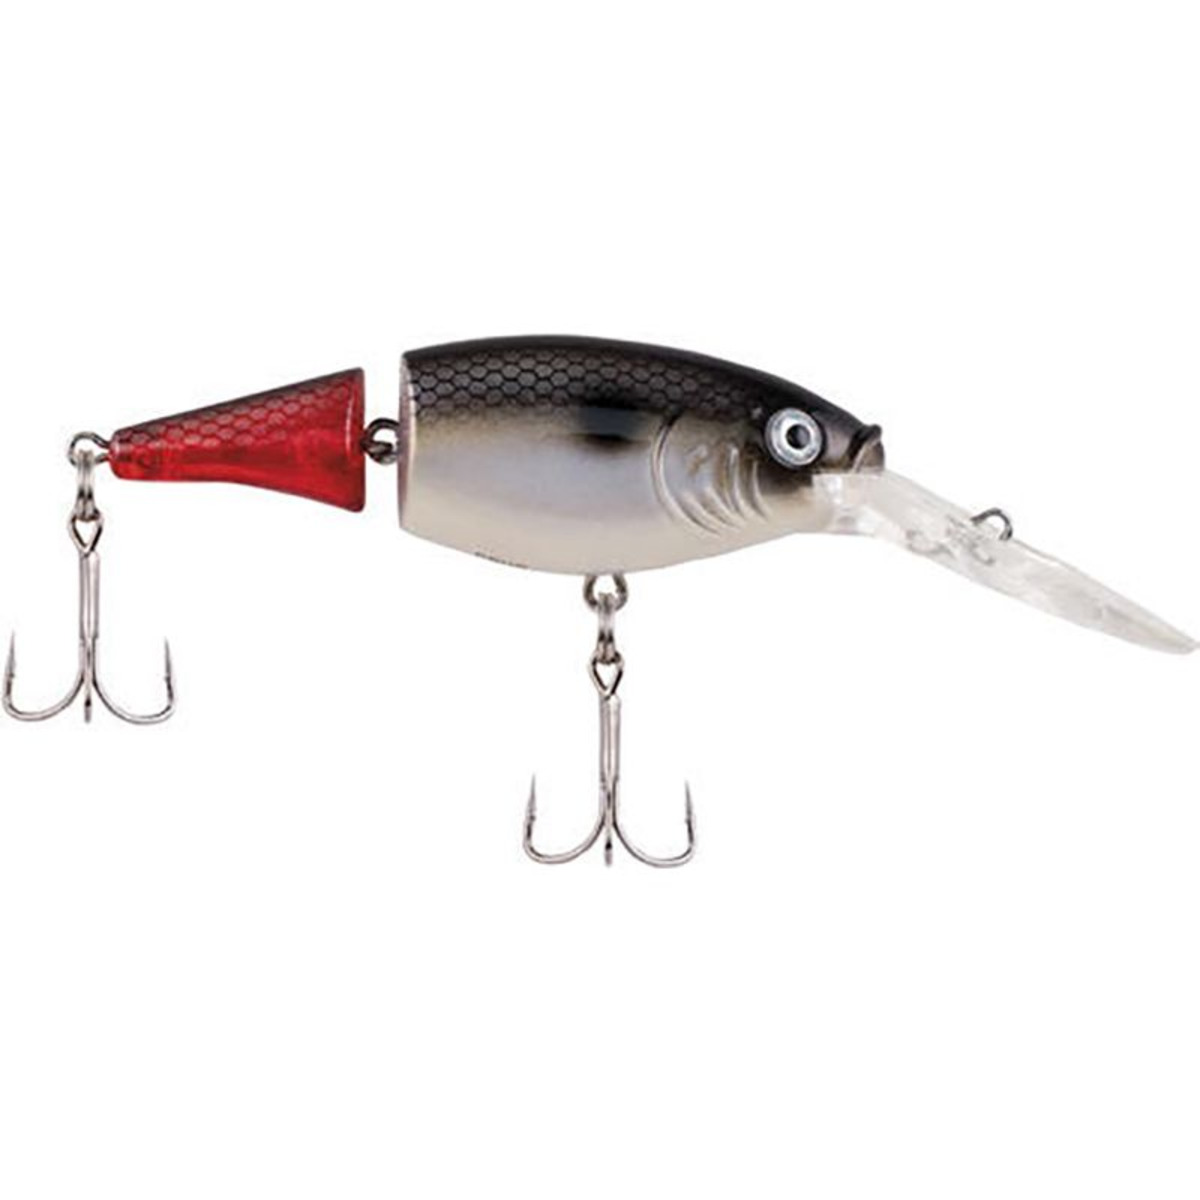 Berkley Flicker Shad Jointed Fire Tail - 5 cm - 6 g - Red Tail